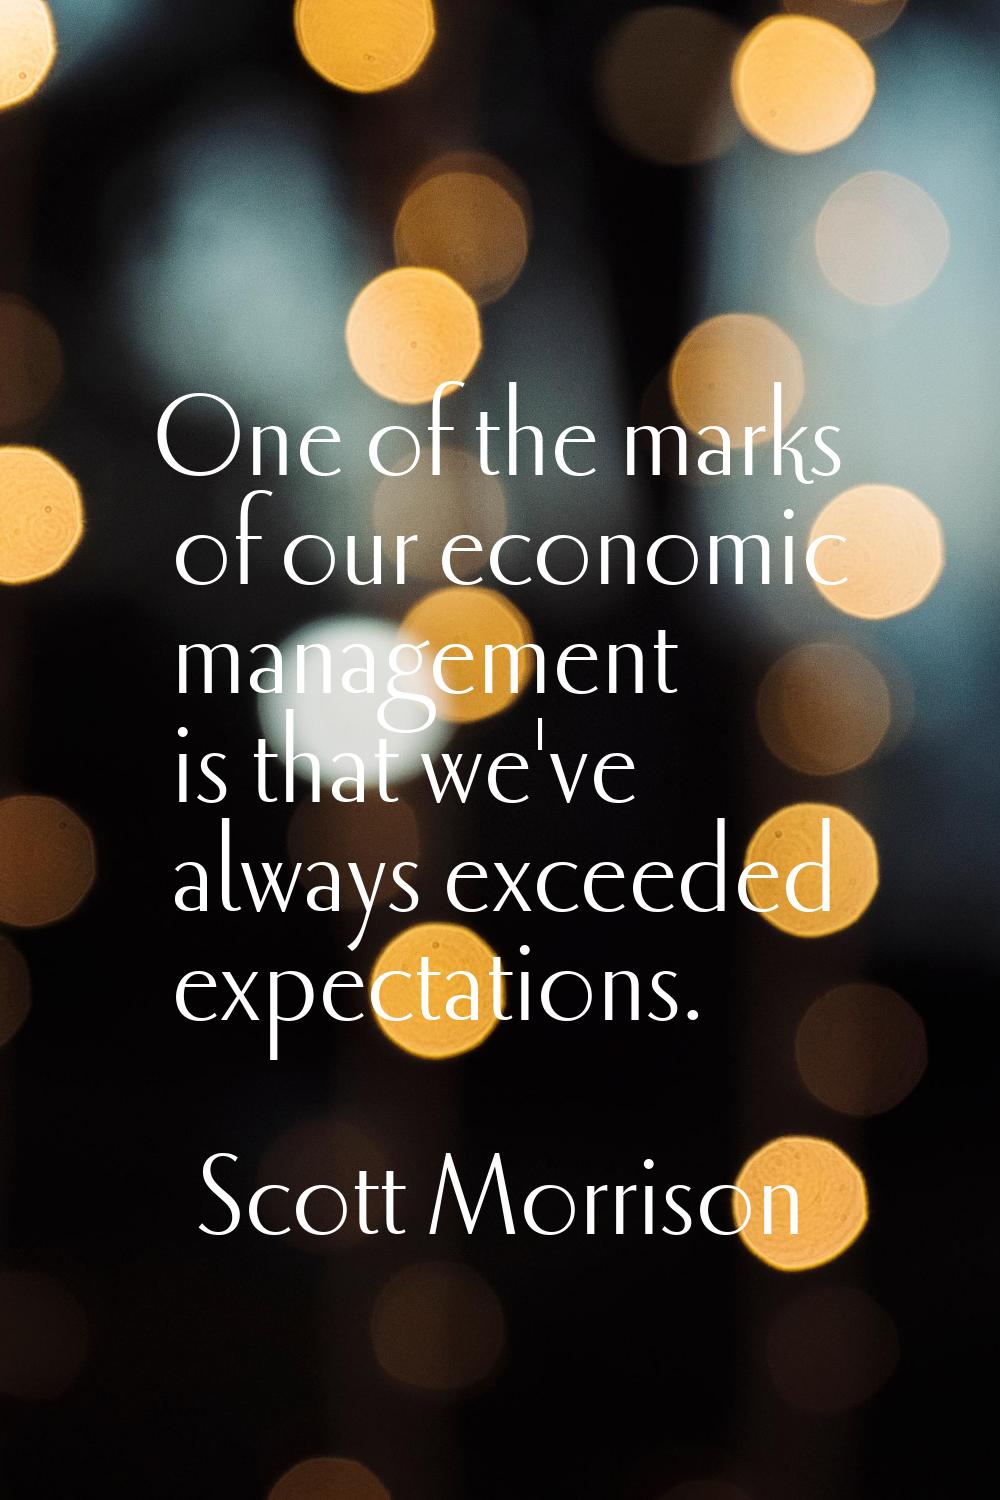 One of the marks of our economic management is that we've always exceeded expectations.